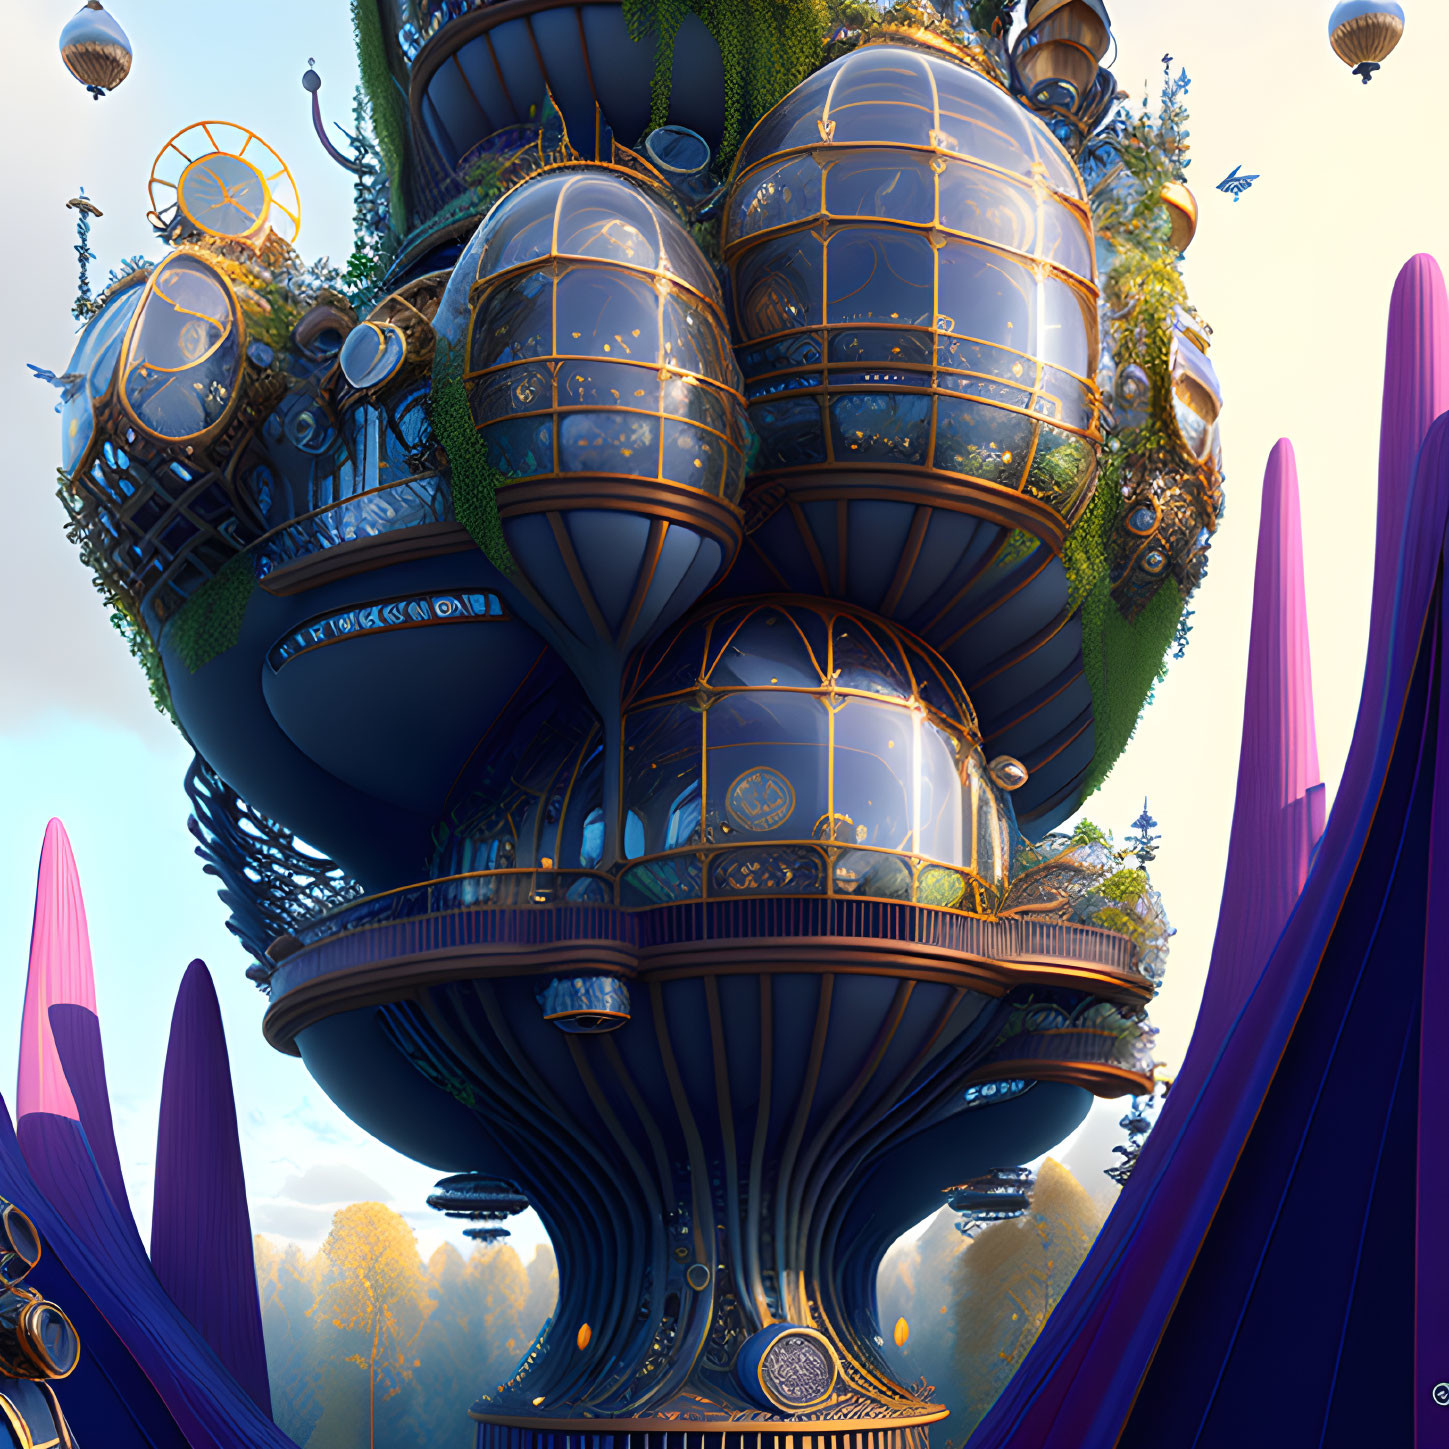 Steampunk city with metallic structures, glass domes, gears, and lush greenery above surreal